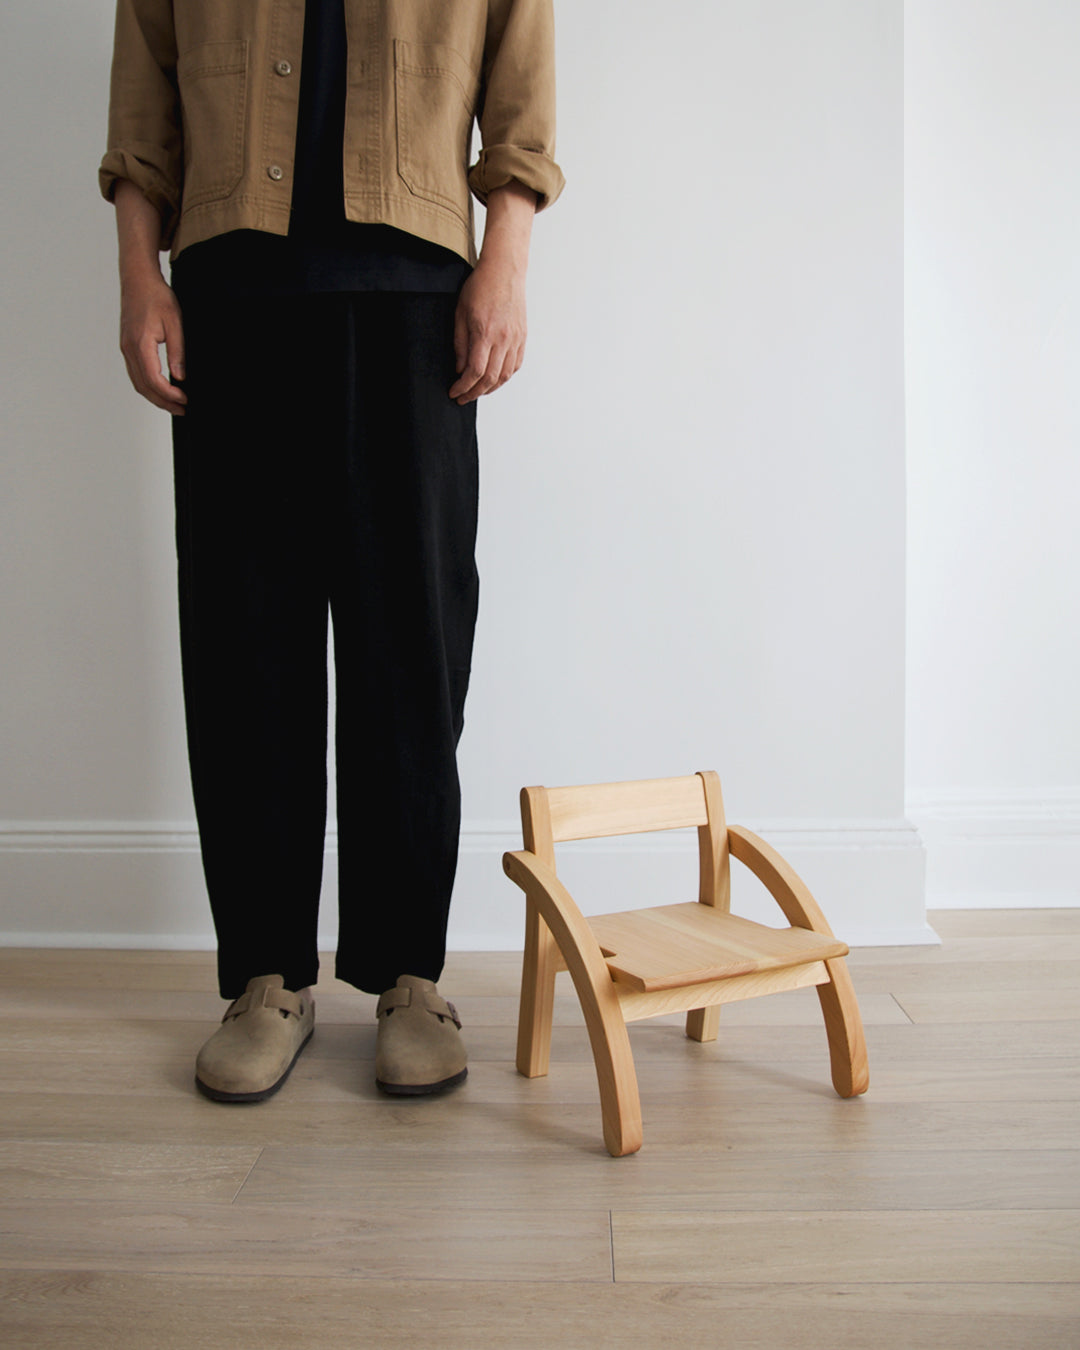 A man in all black attire with khaki clogs standing next to the 1 year old school chair by makoto koizumi.